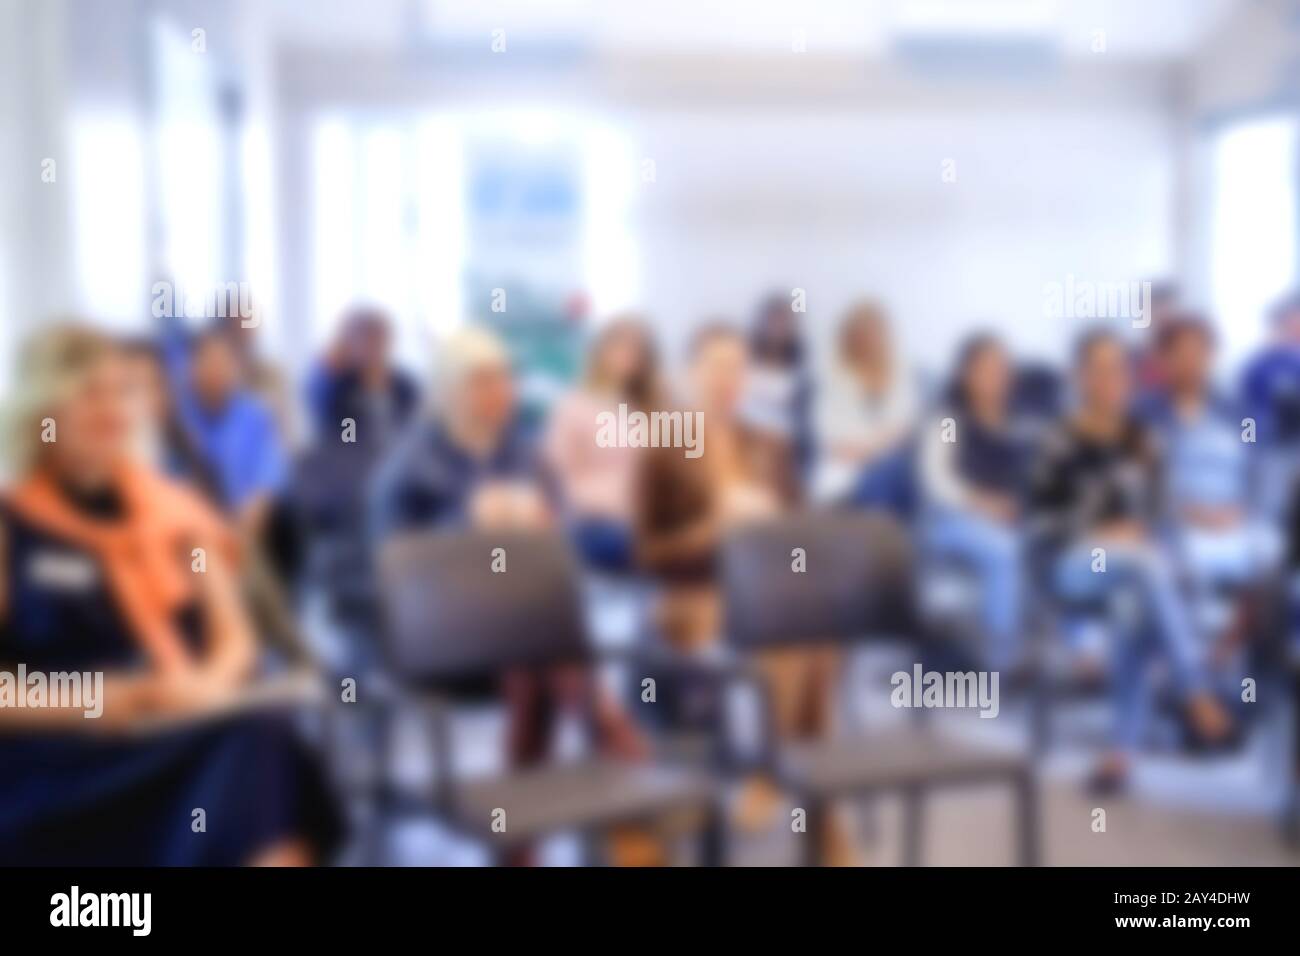 Blurred front view background classroom. High school or undergraduate student sitting on lecture chairs listening to speaker. Education concept Stock Photo